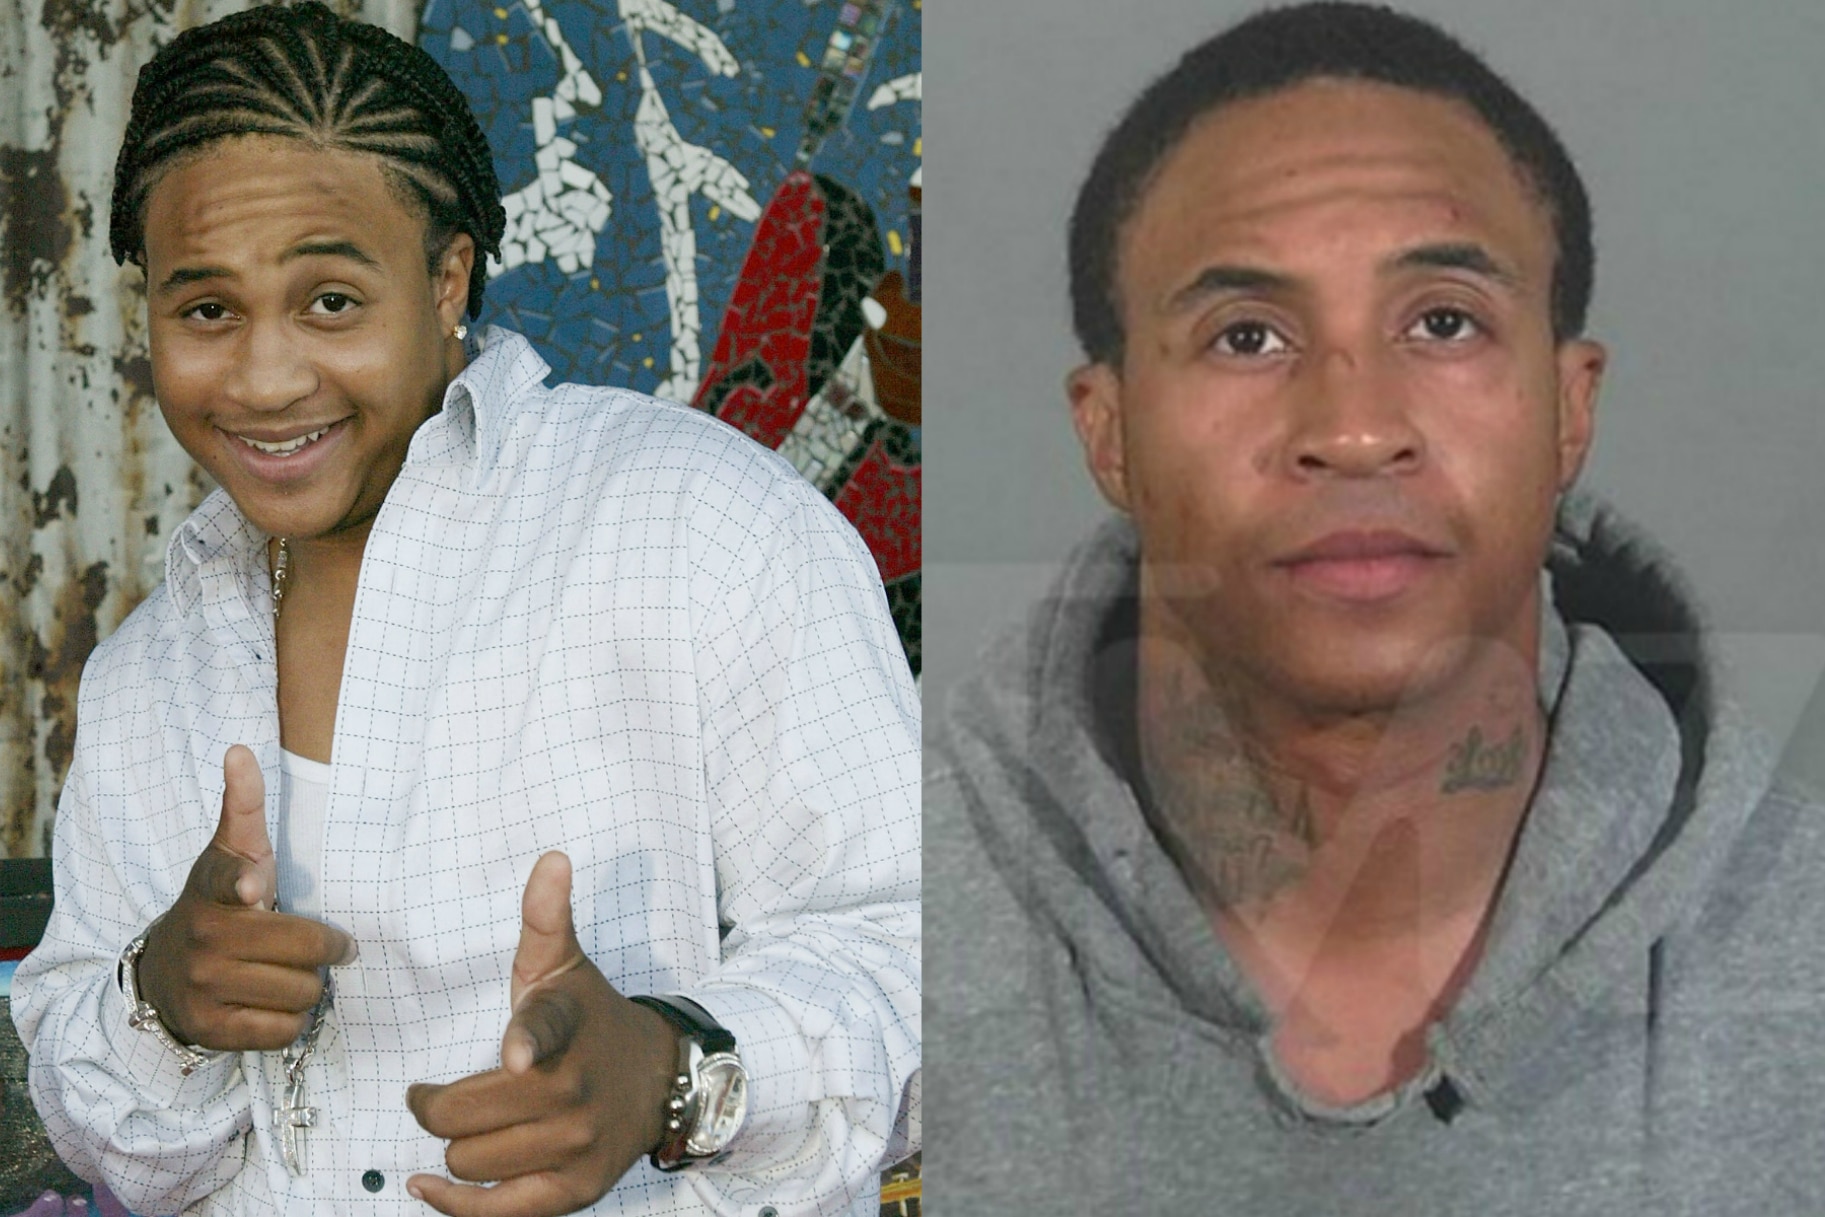 That S So Raven Star Orlando Brown Arrested For Meth Possession Beating His Girlfriend Very